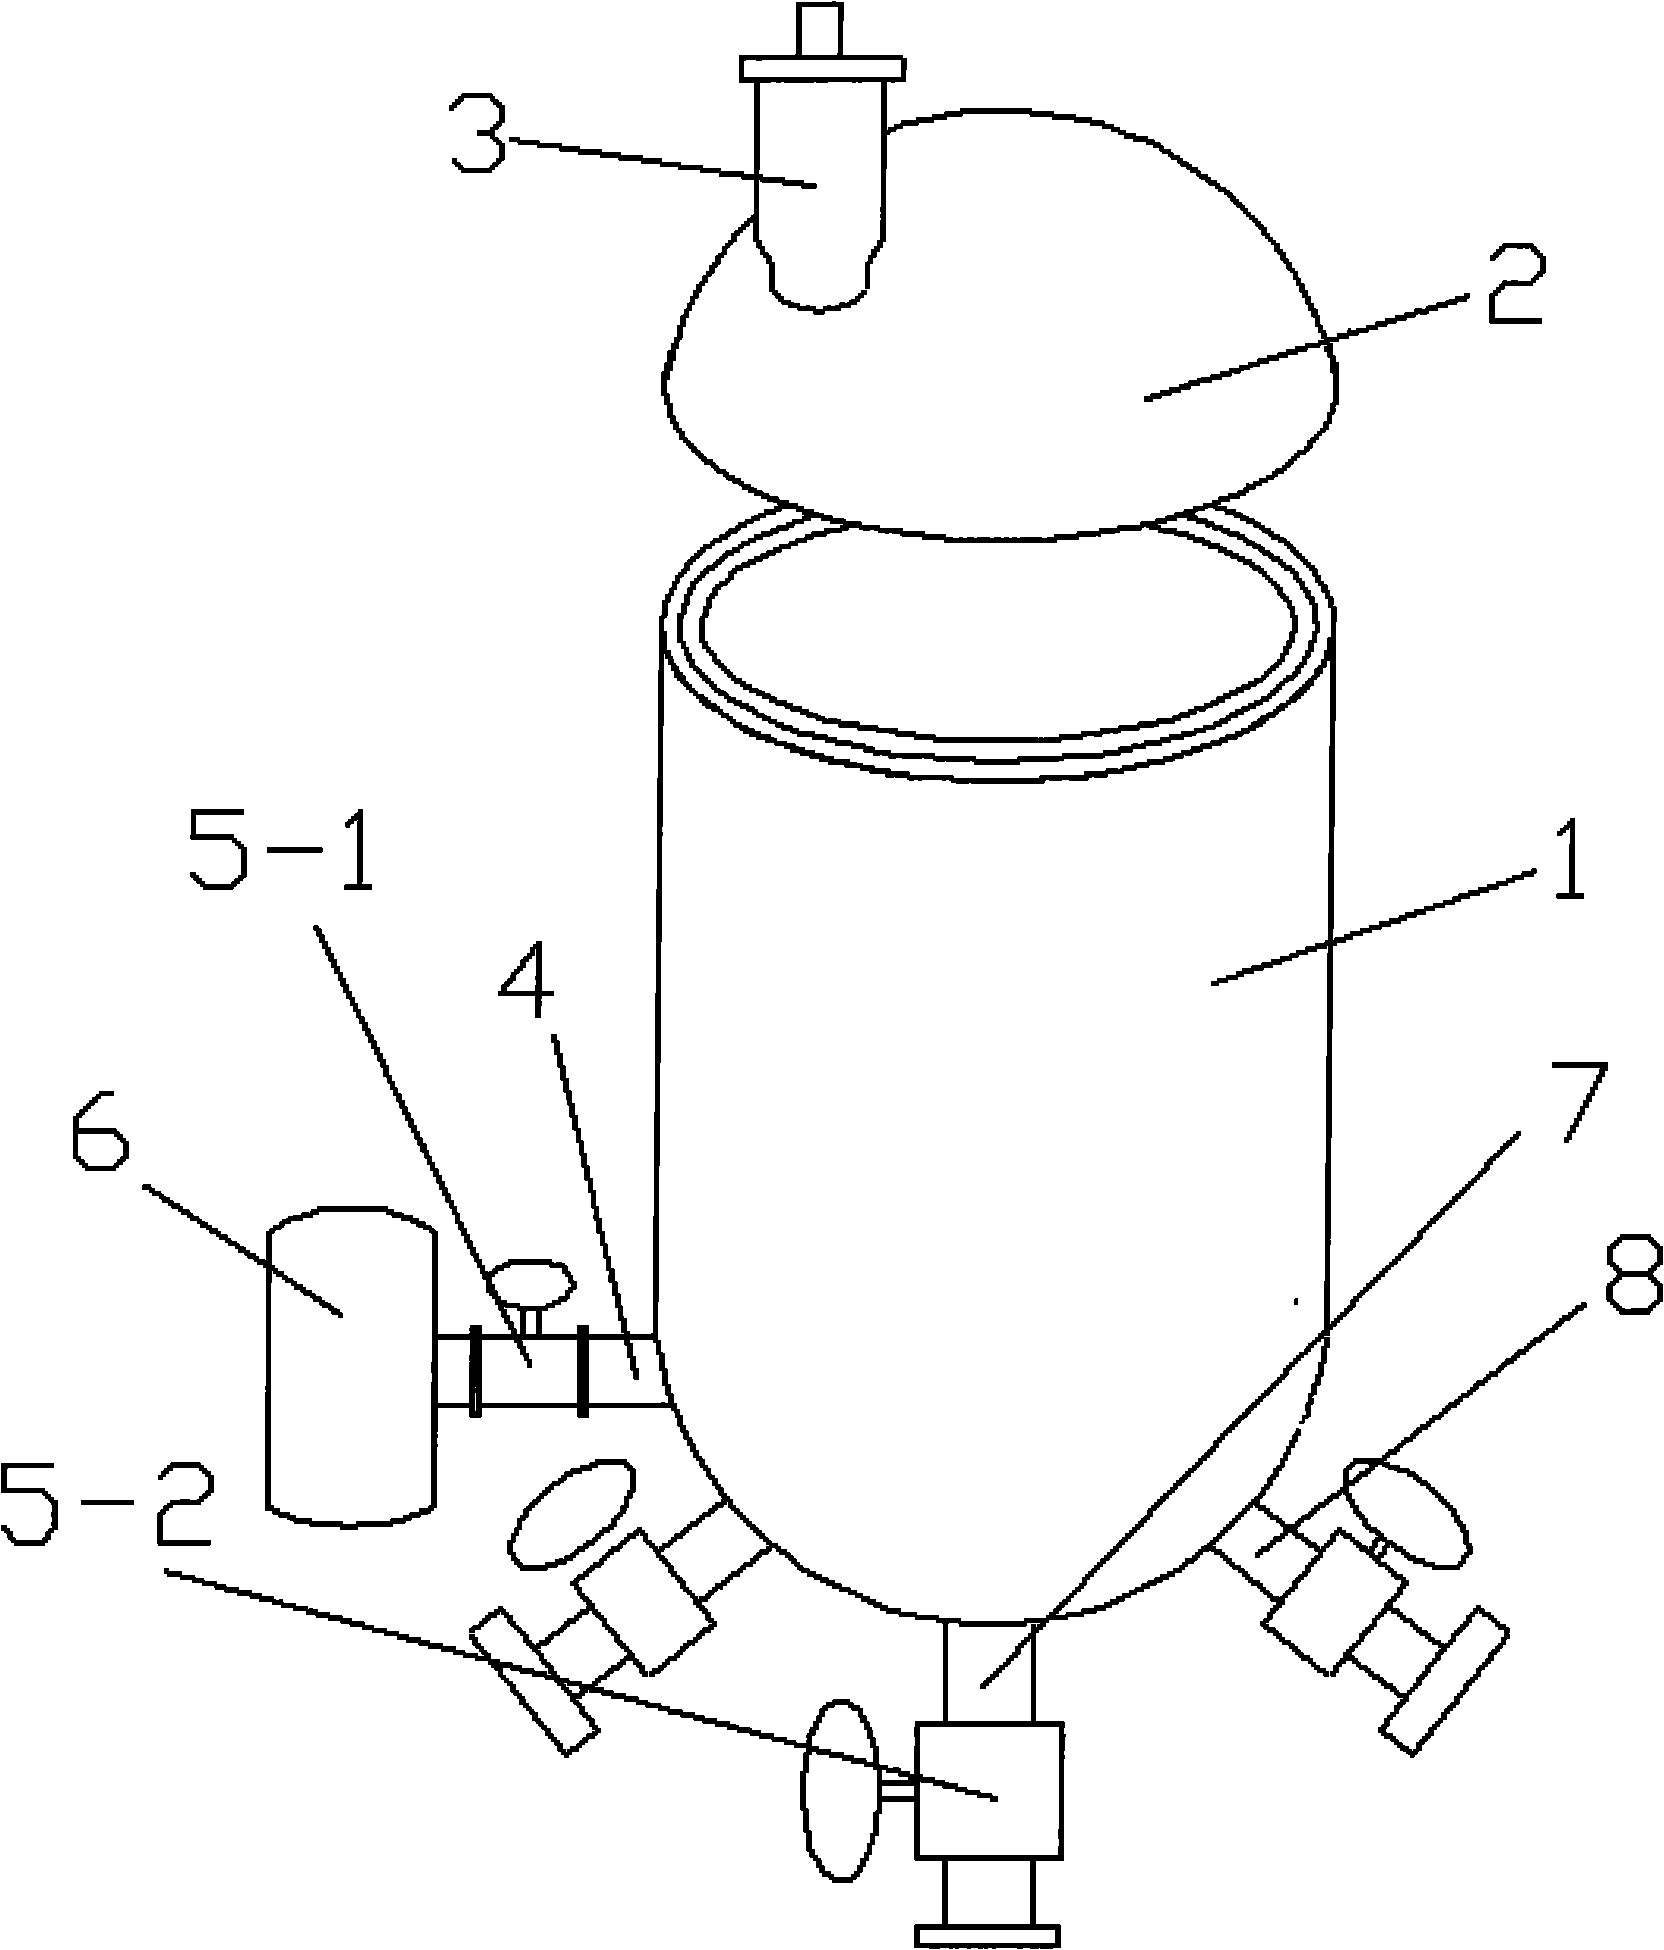 Double-layer double-safety autoclave with discharge pipe orifices